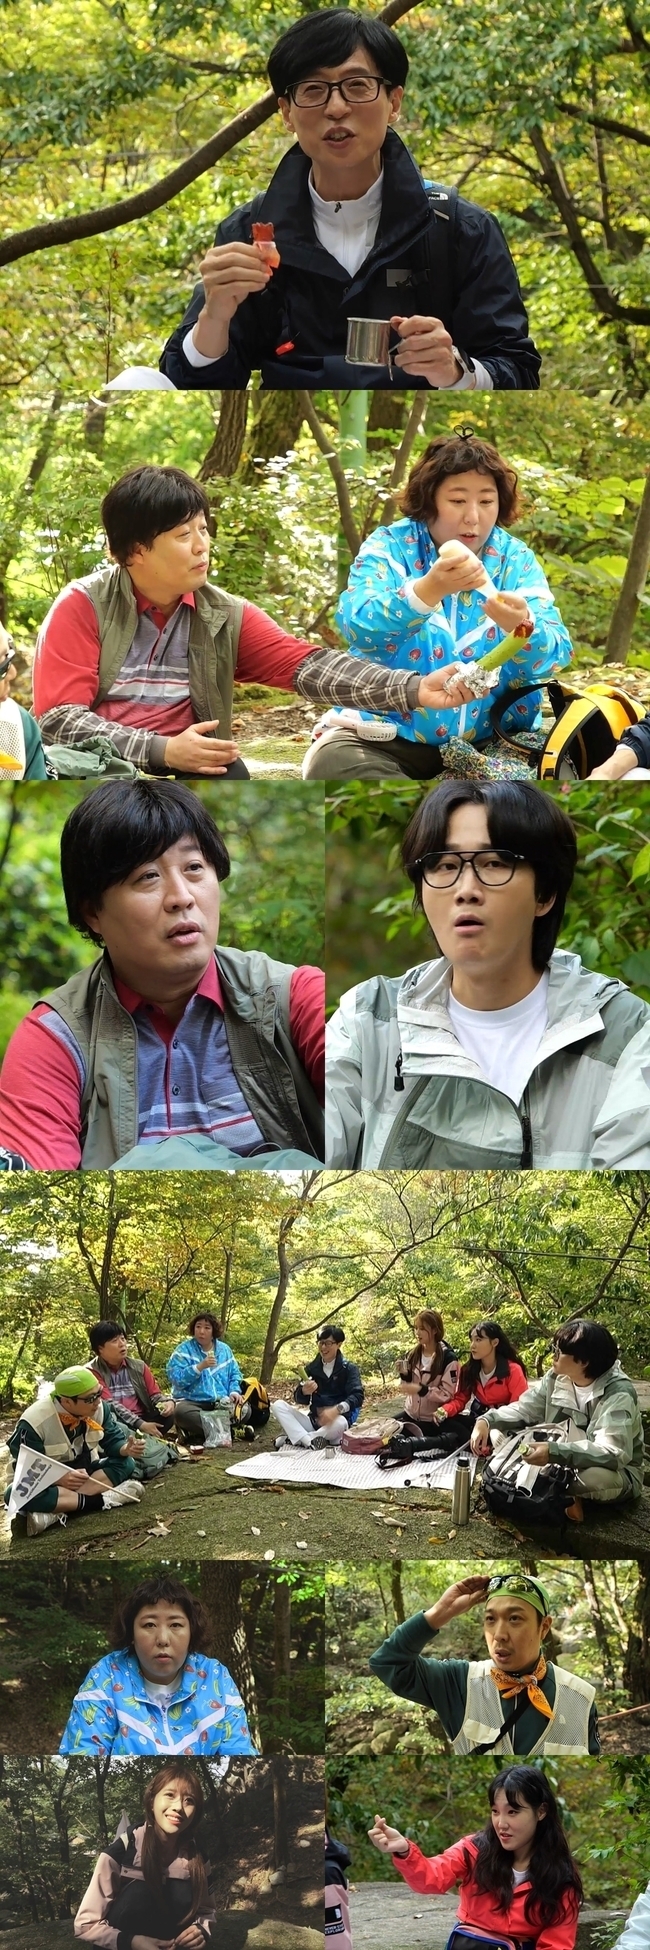 In front of JMTs head of the department, Yoo Jae-suk, a career chief and new interviewer Lee Yong-jin will have a tense nervous battle.MBCs Hangout with Yoo +, which will be broadcast on October 23, will reveal the final interview of 2021 JMT recruitment by JMT director Yoo and interviewees.In the photo released on the 22nd, there are JMT general manager and interview students who take a break during climbing.Yoo is making a embarrassed look with coffee and jerky, and there is a picture of Mirage preparing Burinak Mayonez next to a chief with a cucumber with a lot of red pepper paste.Jung and Mirage, who prepared mountaineering snacks, will create a warm feeling with unexpected food chemistry.During the rest, Yoo asked the interviewers about their feelings and led a cheerful atmosphere.But an unusual atmosphere was formed between a career chief and new Interview student Lee Yong-jin.When Interview, who has been studying lion language these days, said that he learned military daily life, Lee Yong-jin said, It is one of the three rivers.So, Chung said, The military Ilhak is a triangular five-wheeled thing.Yoo emphasized the organizational culture of JMT, which aims at horizontal relations, and started to adjust the atmosphere, but eventually exploded, saying, I do not have it!The American race also had a tense confrontation between the sergeant and the Americas, with the meaningless (?) common sense pride, which was the same class as us (?) to the sergeant who spelled technology.Is not it? He said, making the head of the department embarrassed.It is said that the strange battle between Chung, the sergeant and the new interviewer who joined Interview as a career worker in JMT recruitment final interview continued.Interviews with their frank hearts are also scheduled to be released, attracting attention to what stories they have told.